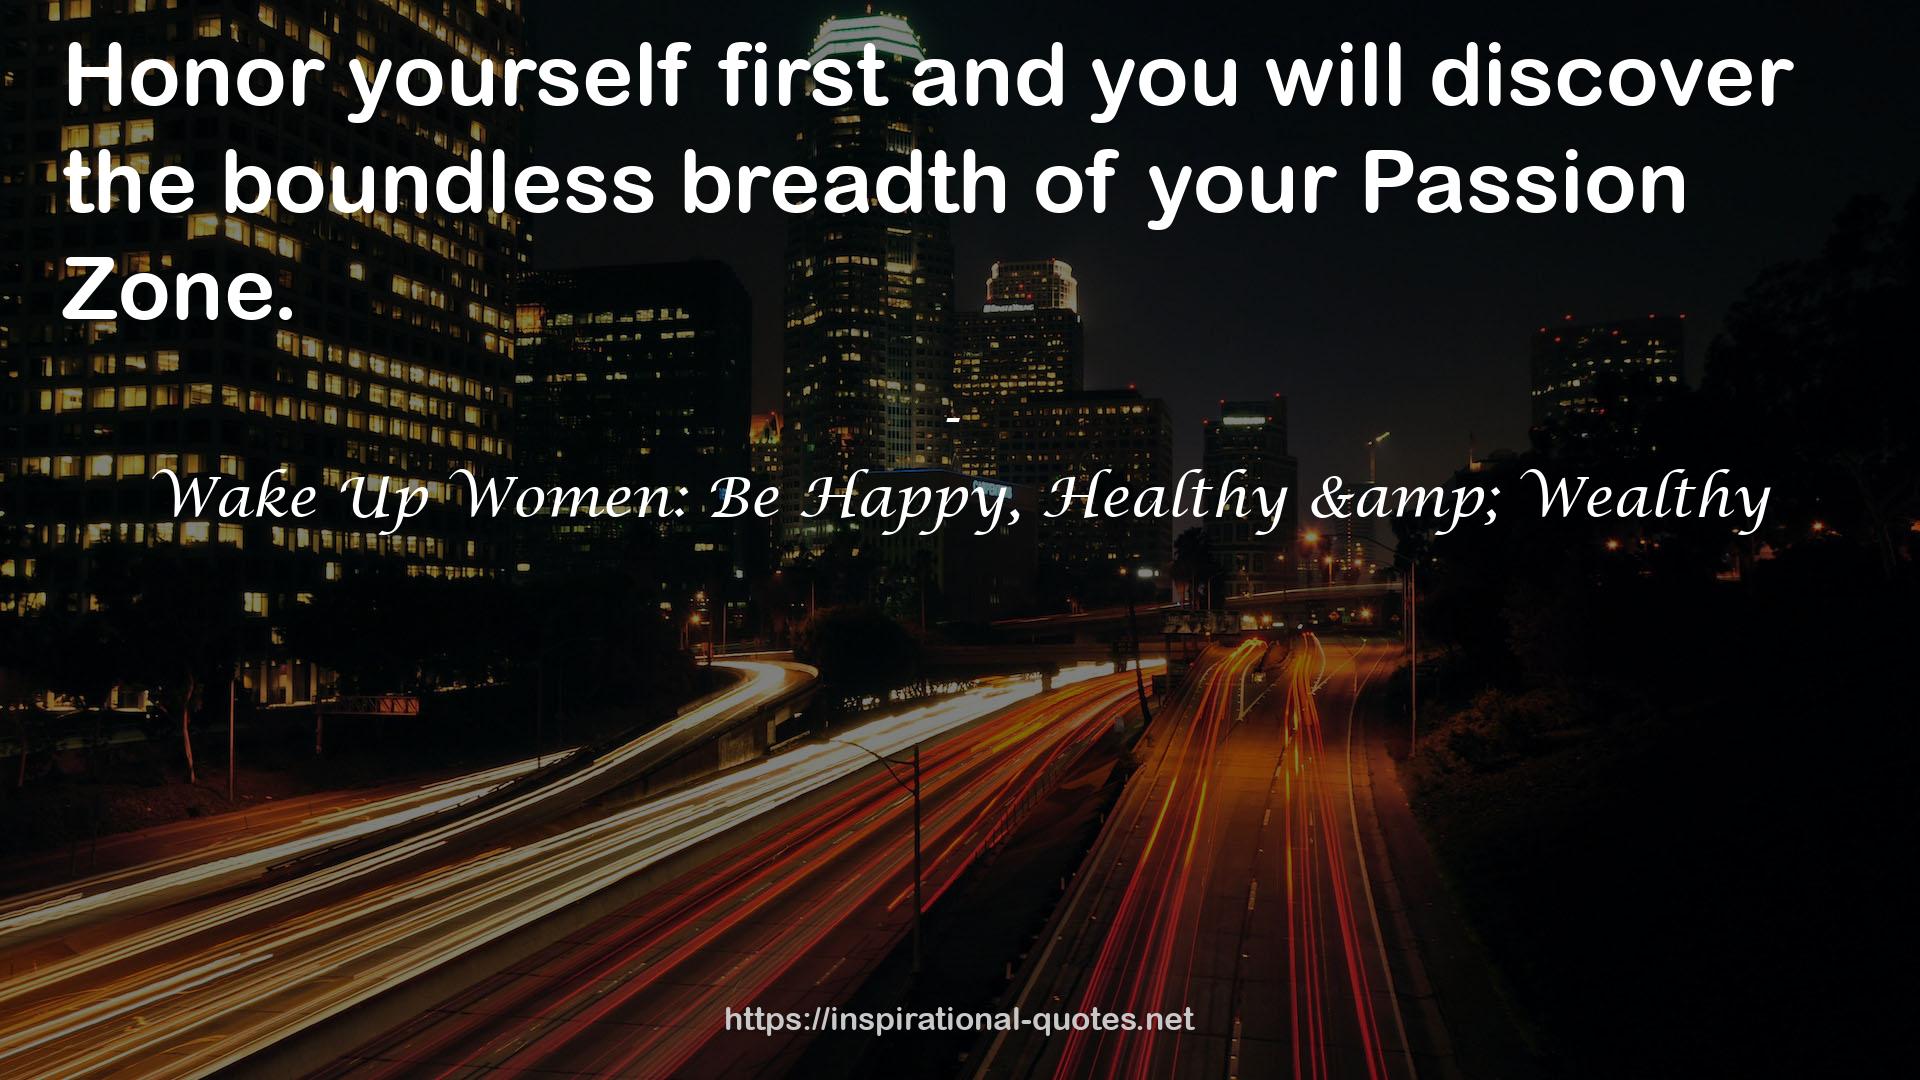 Wake Up Women: Be Happy, Healthy & Wealthy QUOTES